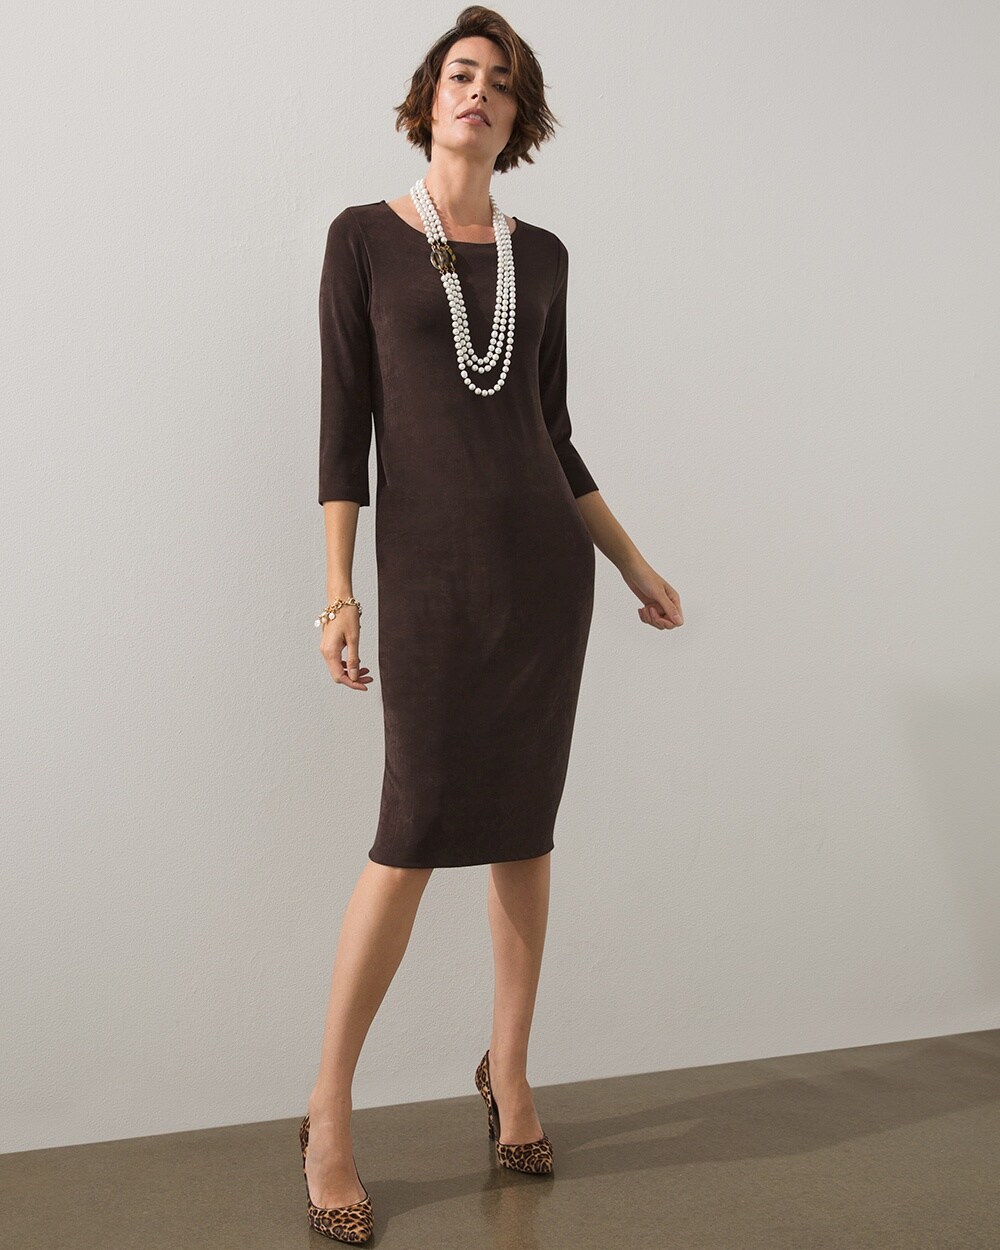 Travelers Classic Scoop Neck Dress video preview image, click to start video